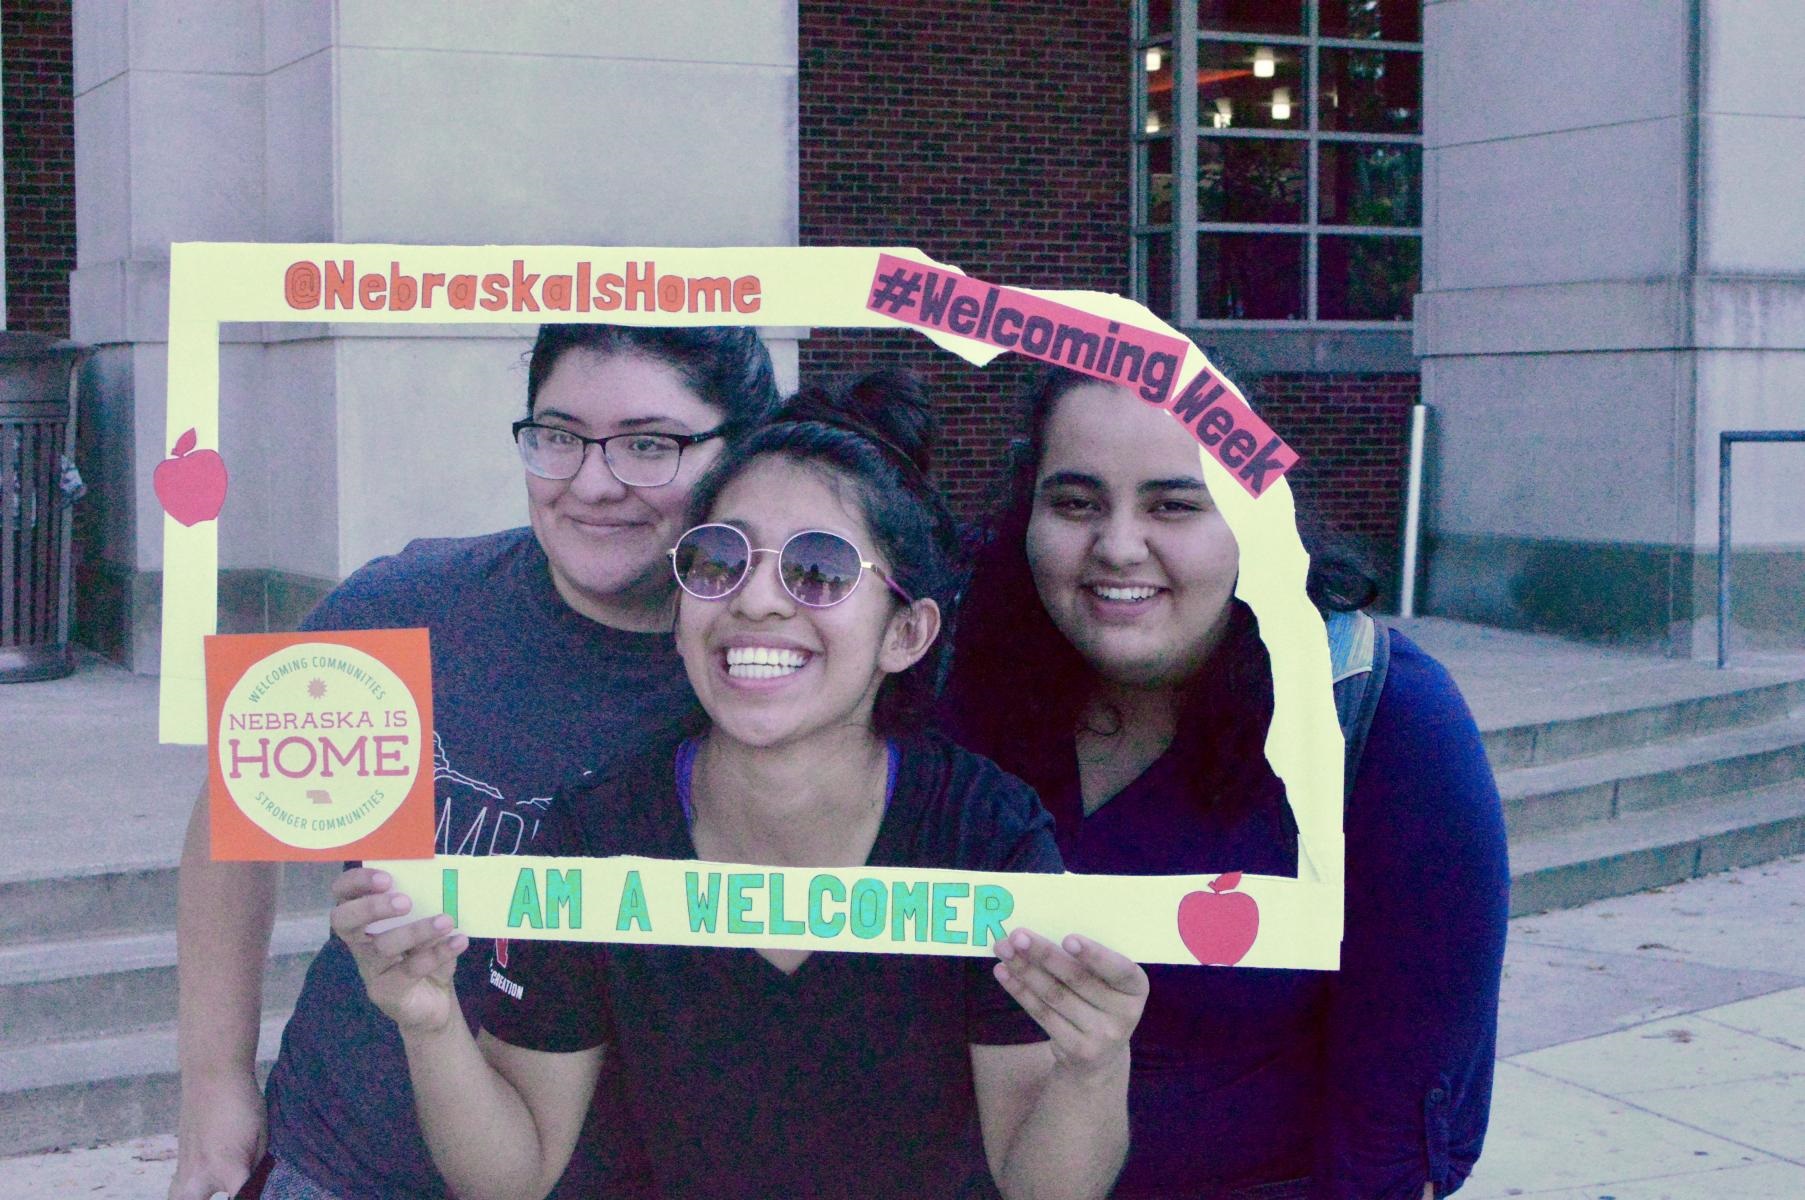 Students raise awareness for immigration policy reform through the Define American student organization